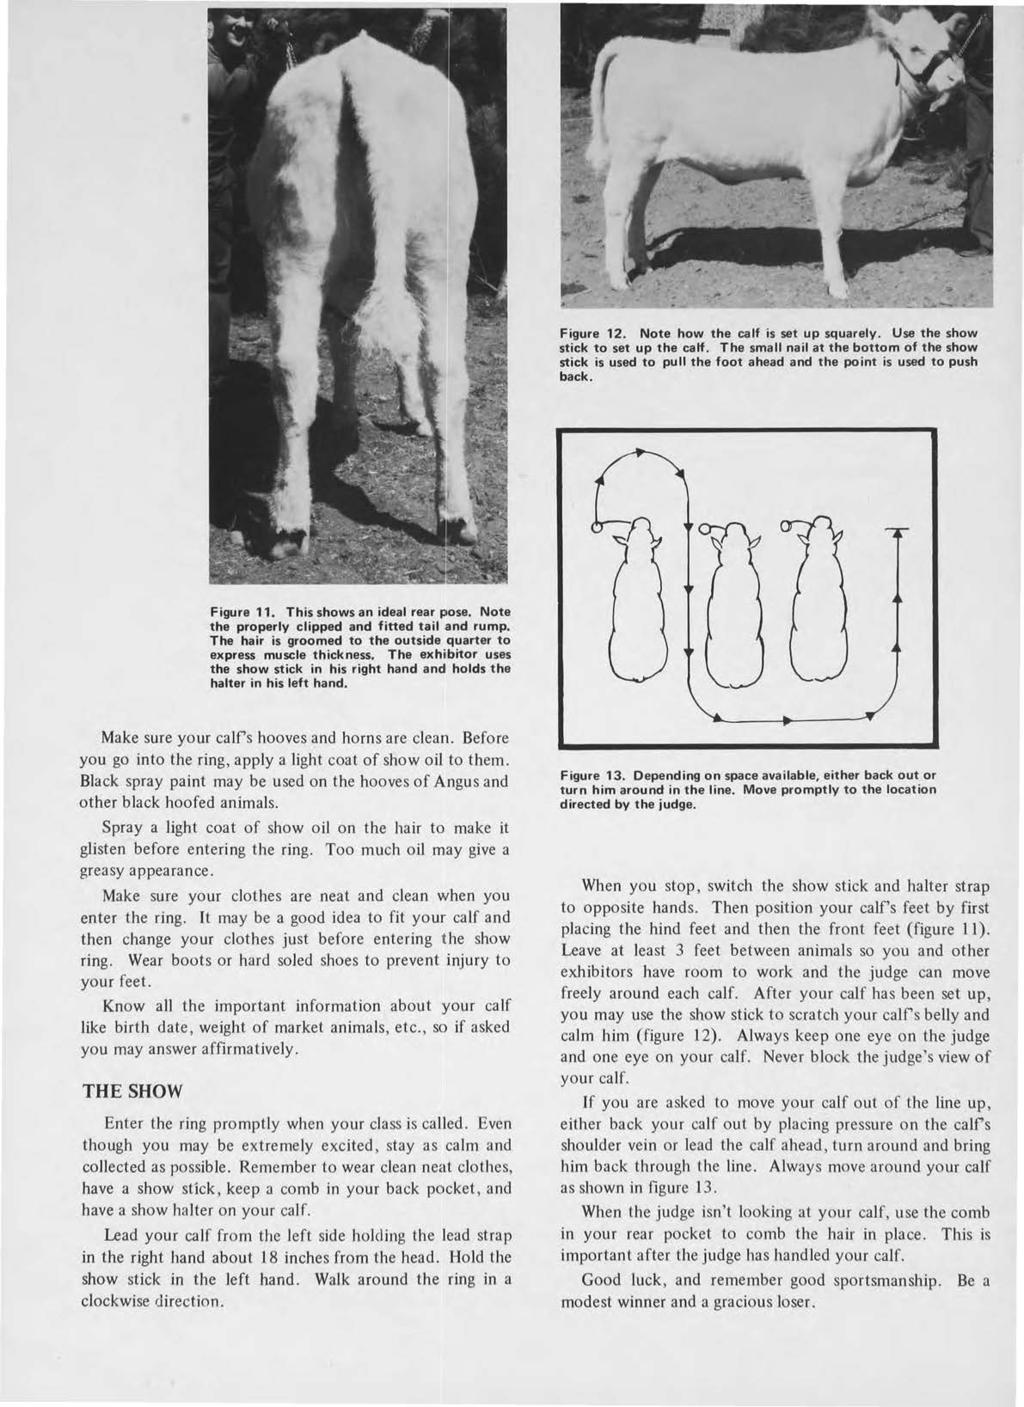 Figure 12. Note how the calf is set up squarely. Use the show stick to set up the calf.